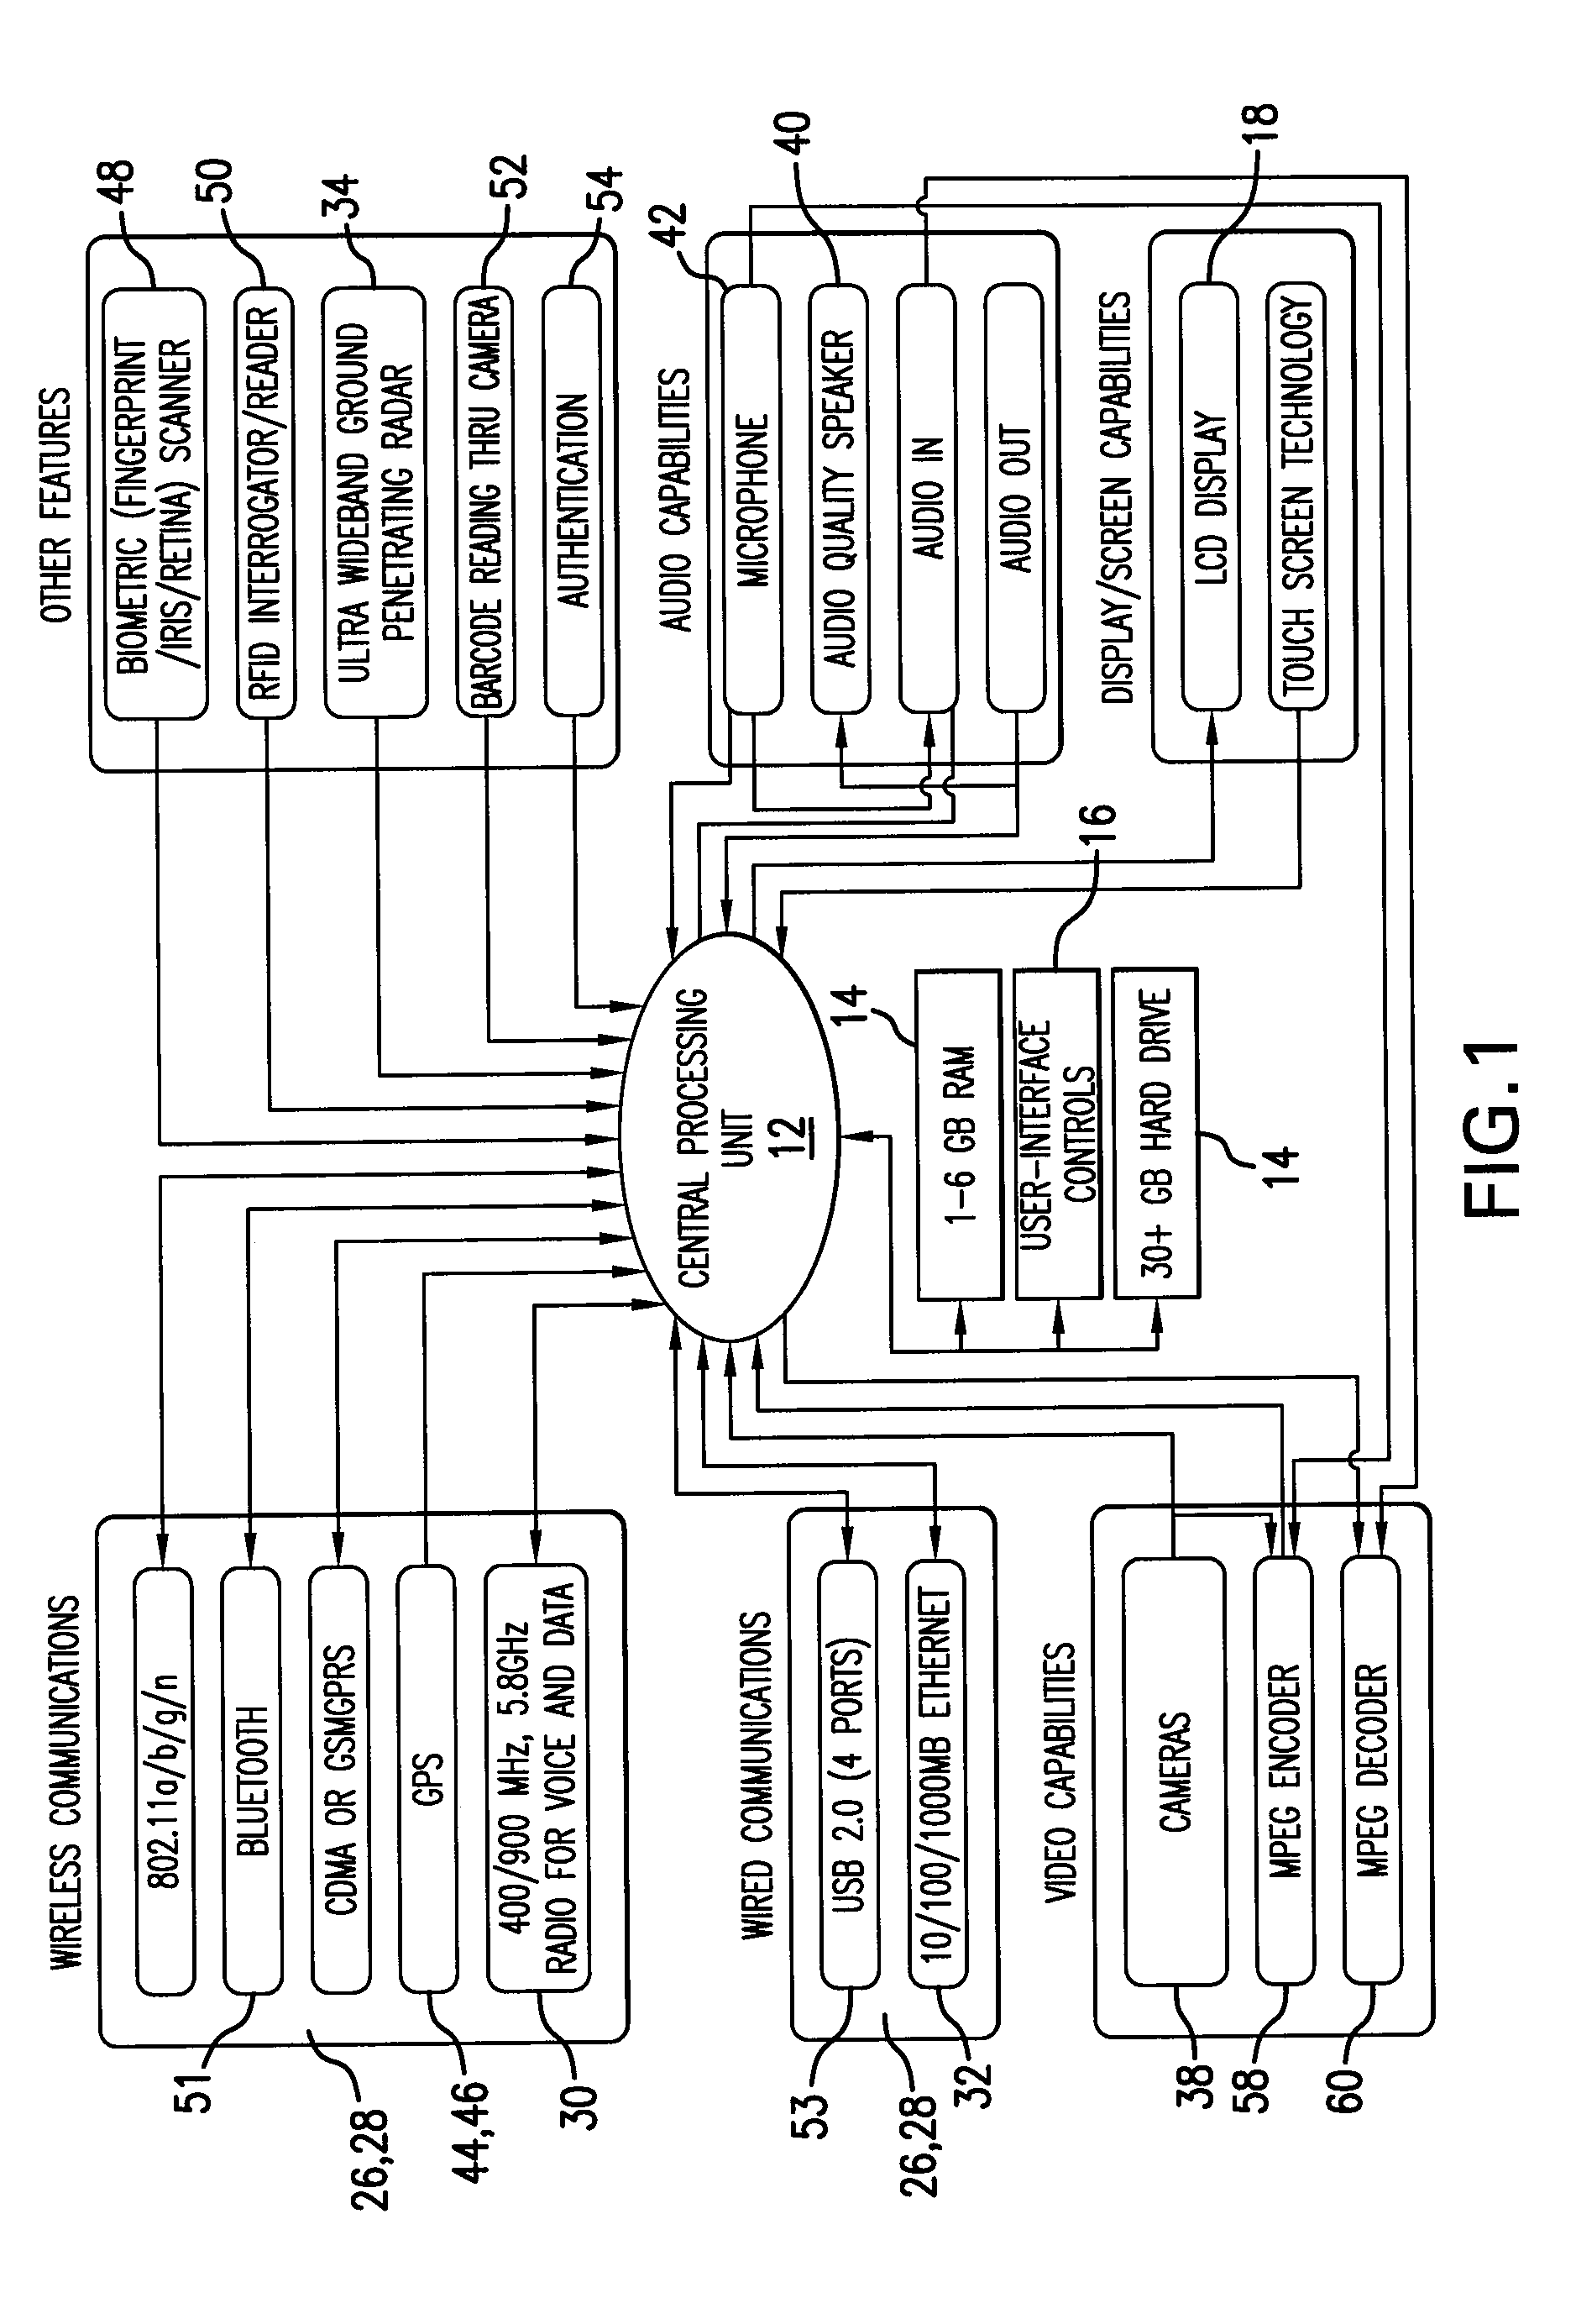 Device and method for digitally watermarking an image with data